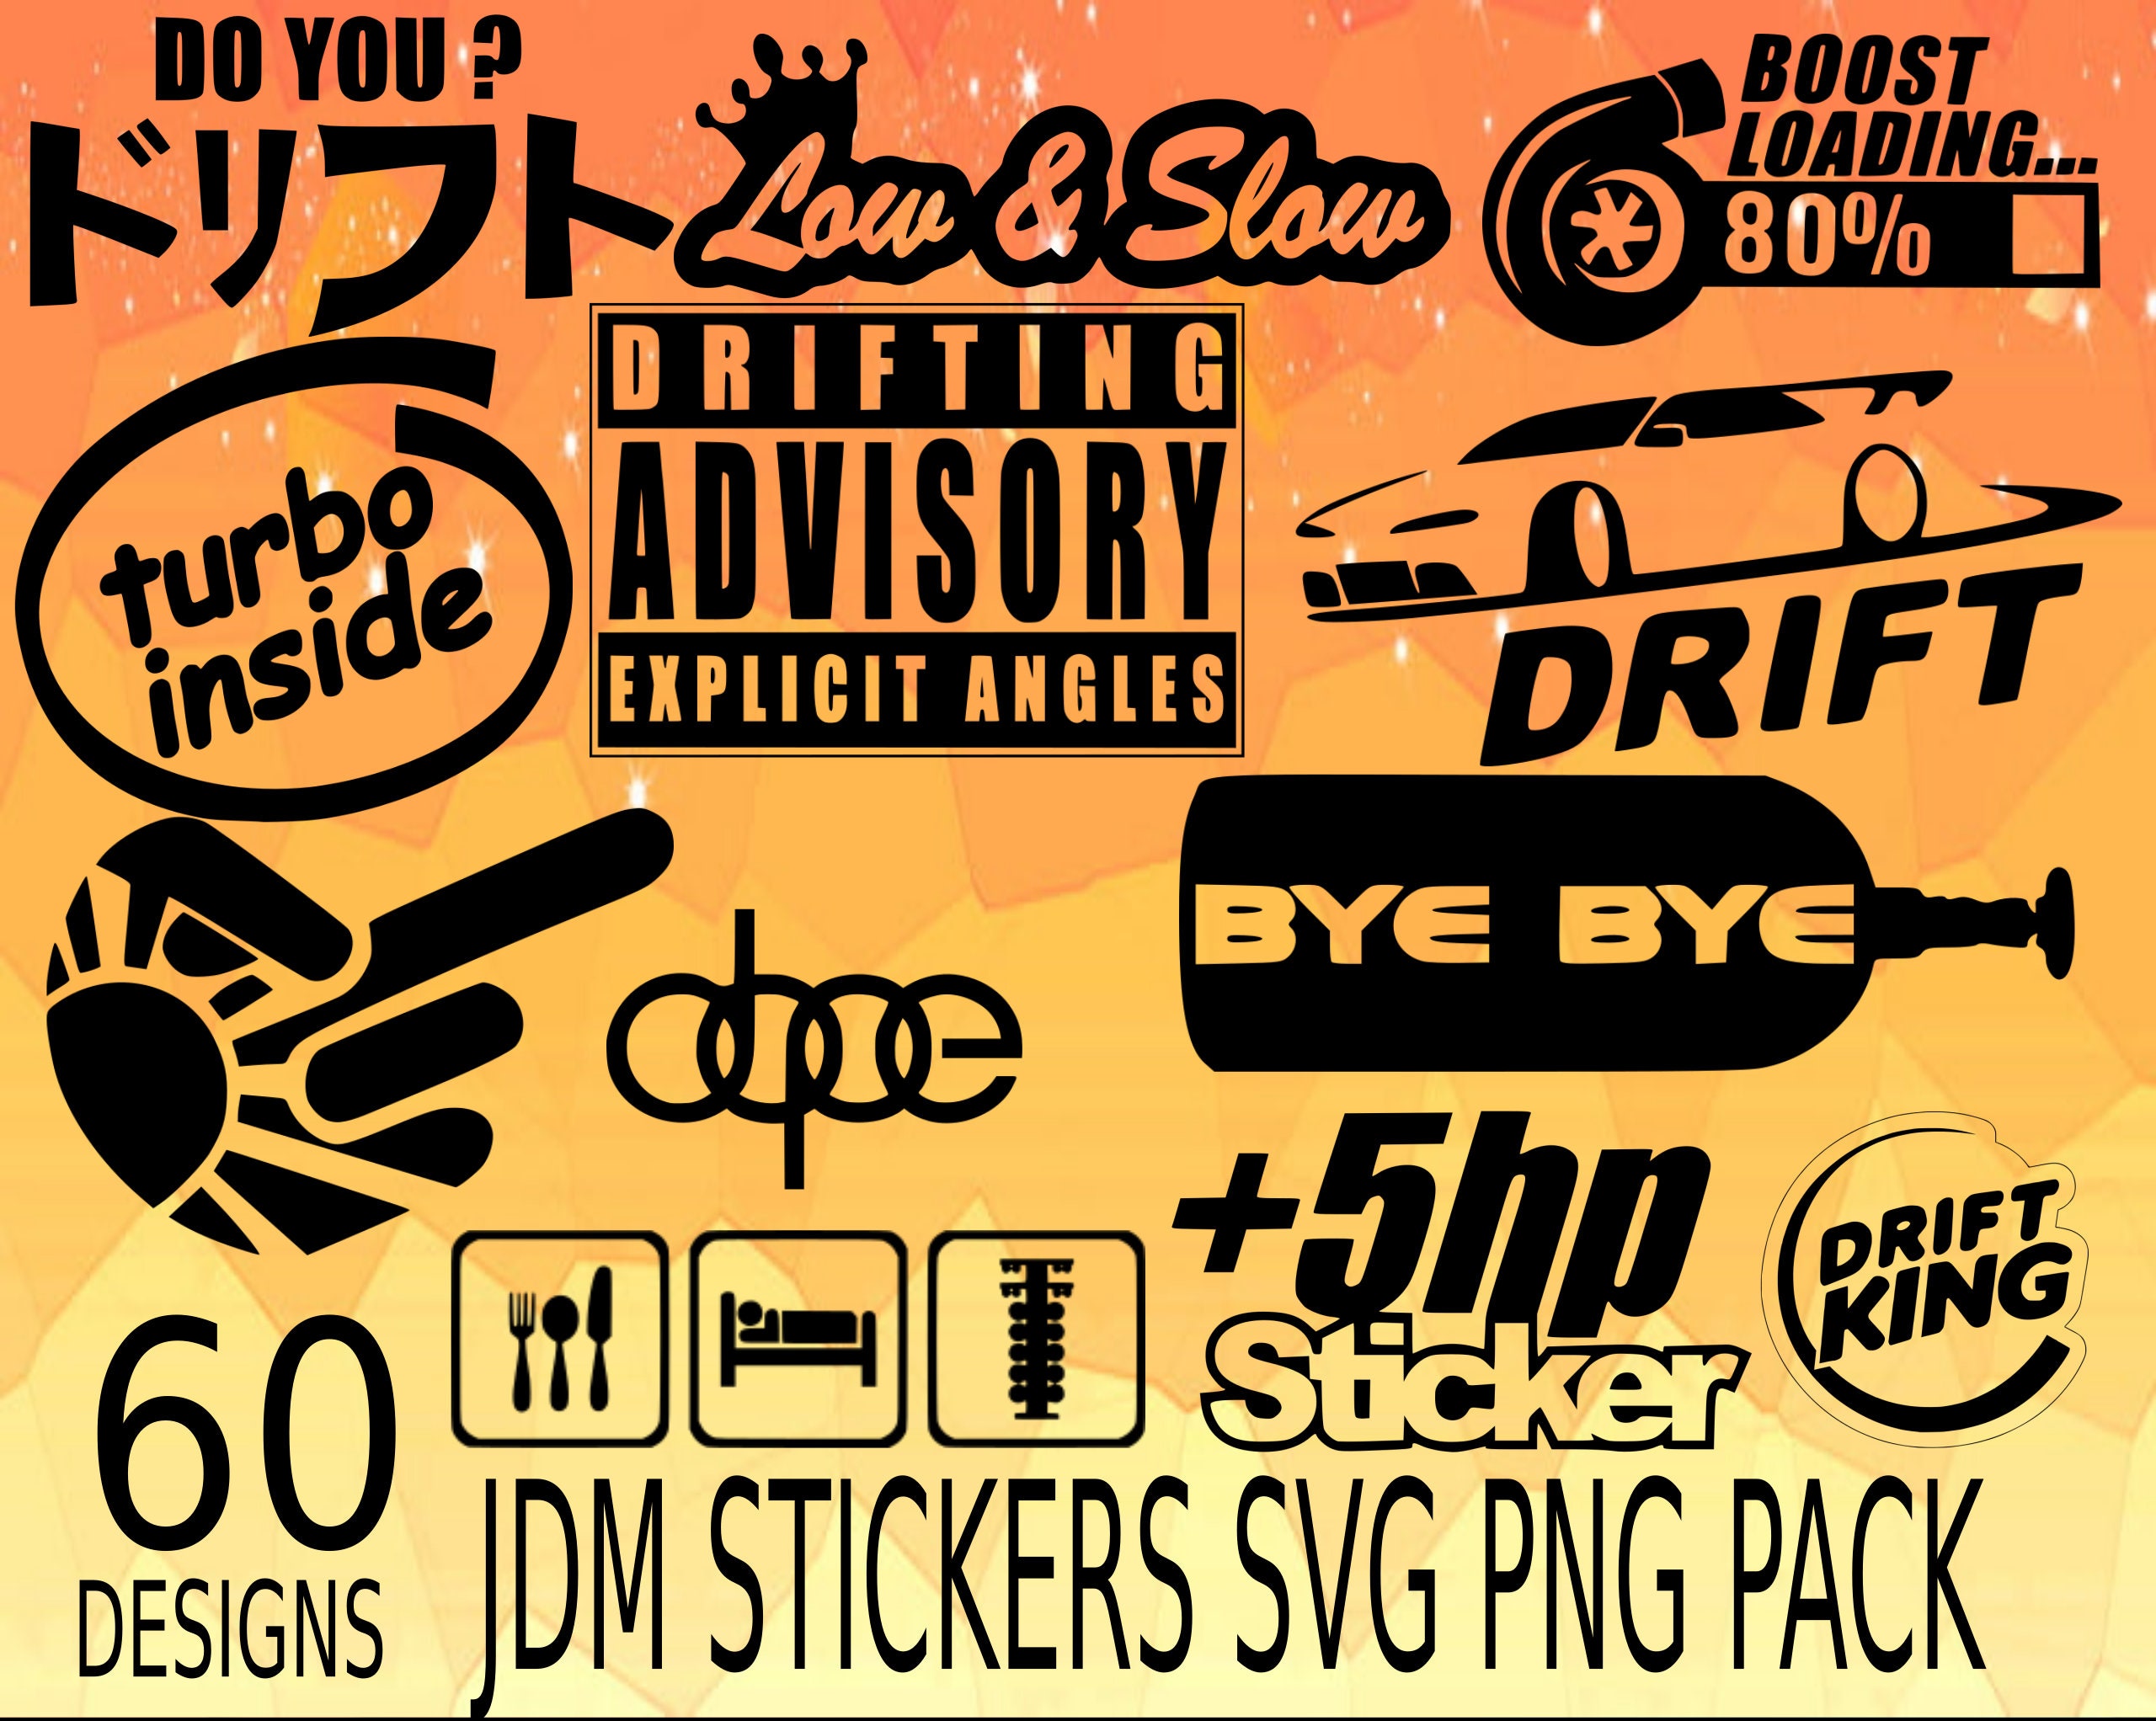 JDM Car Stickers Vector Pack SVG, PNG Vector pack vehicle low rider, best  car stickers turbo sitcker Jdm car bumper sticker vector cut file